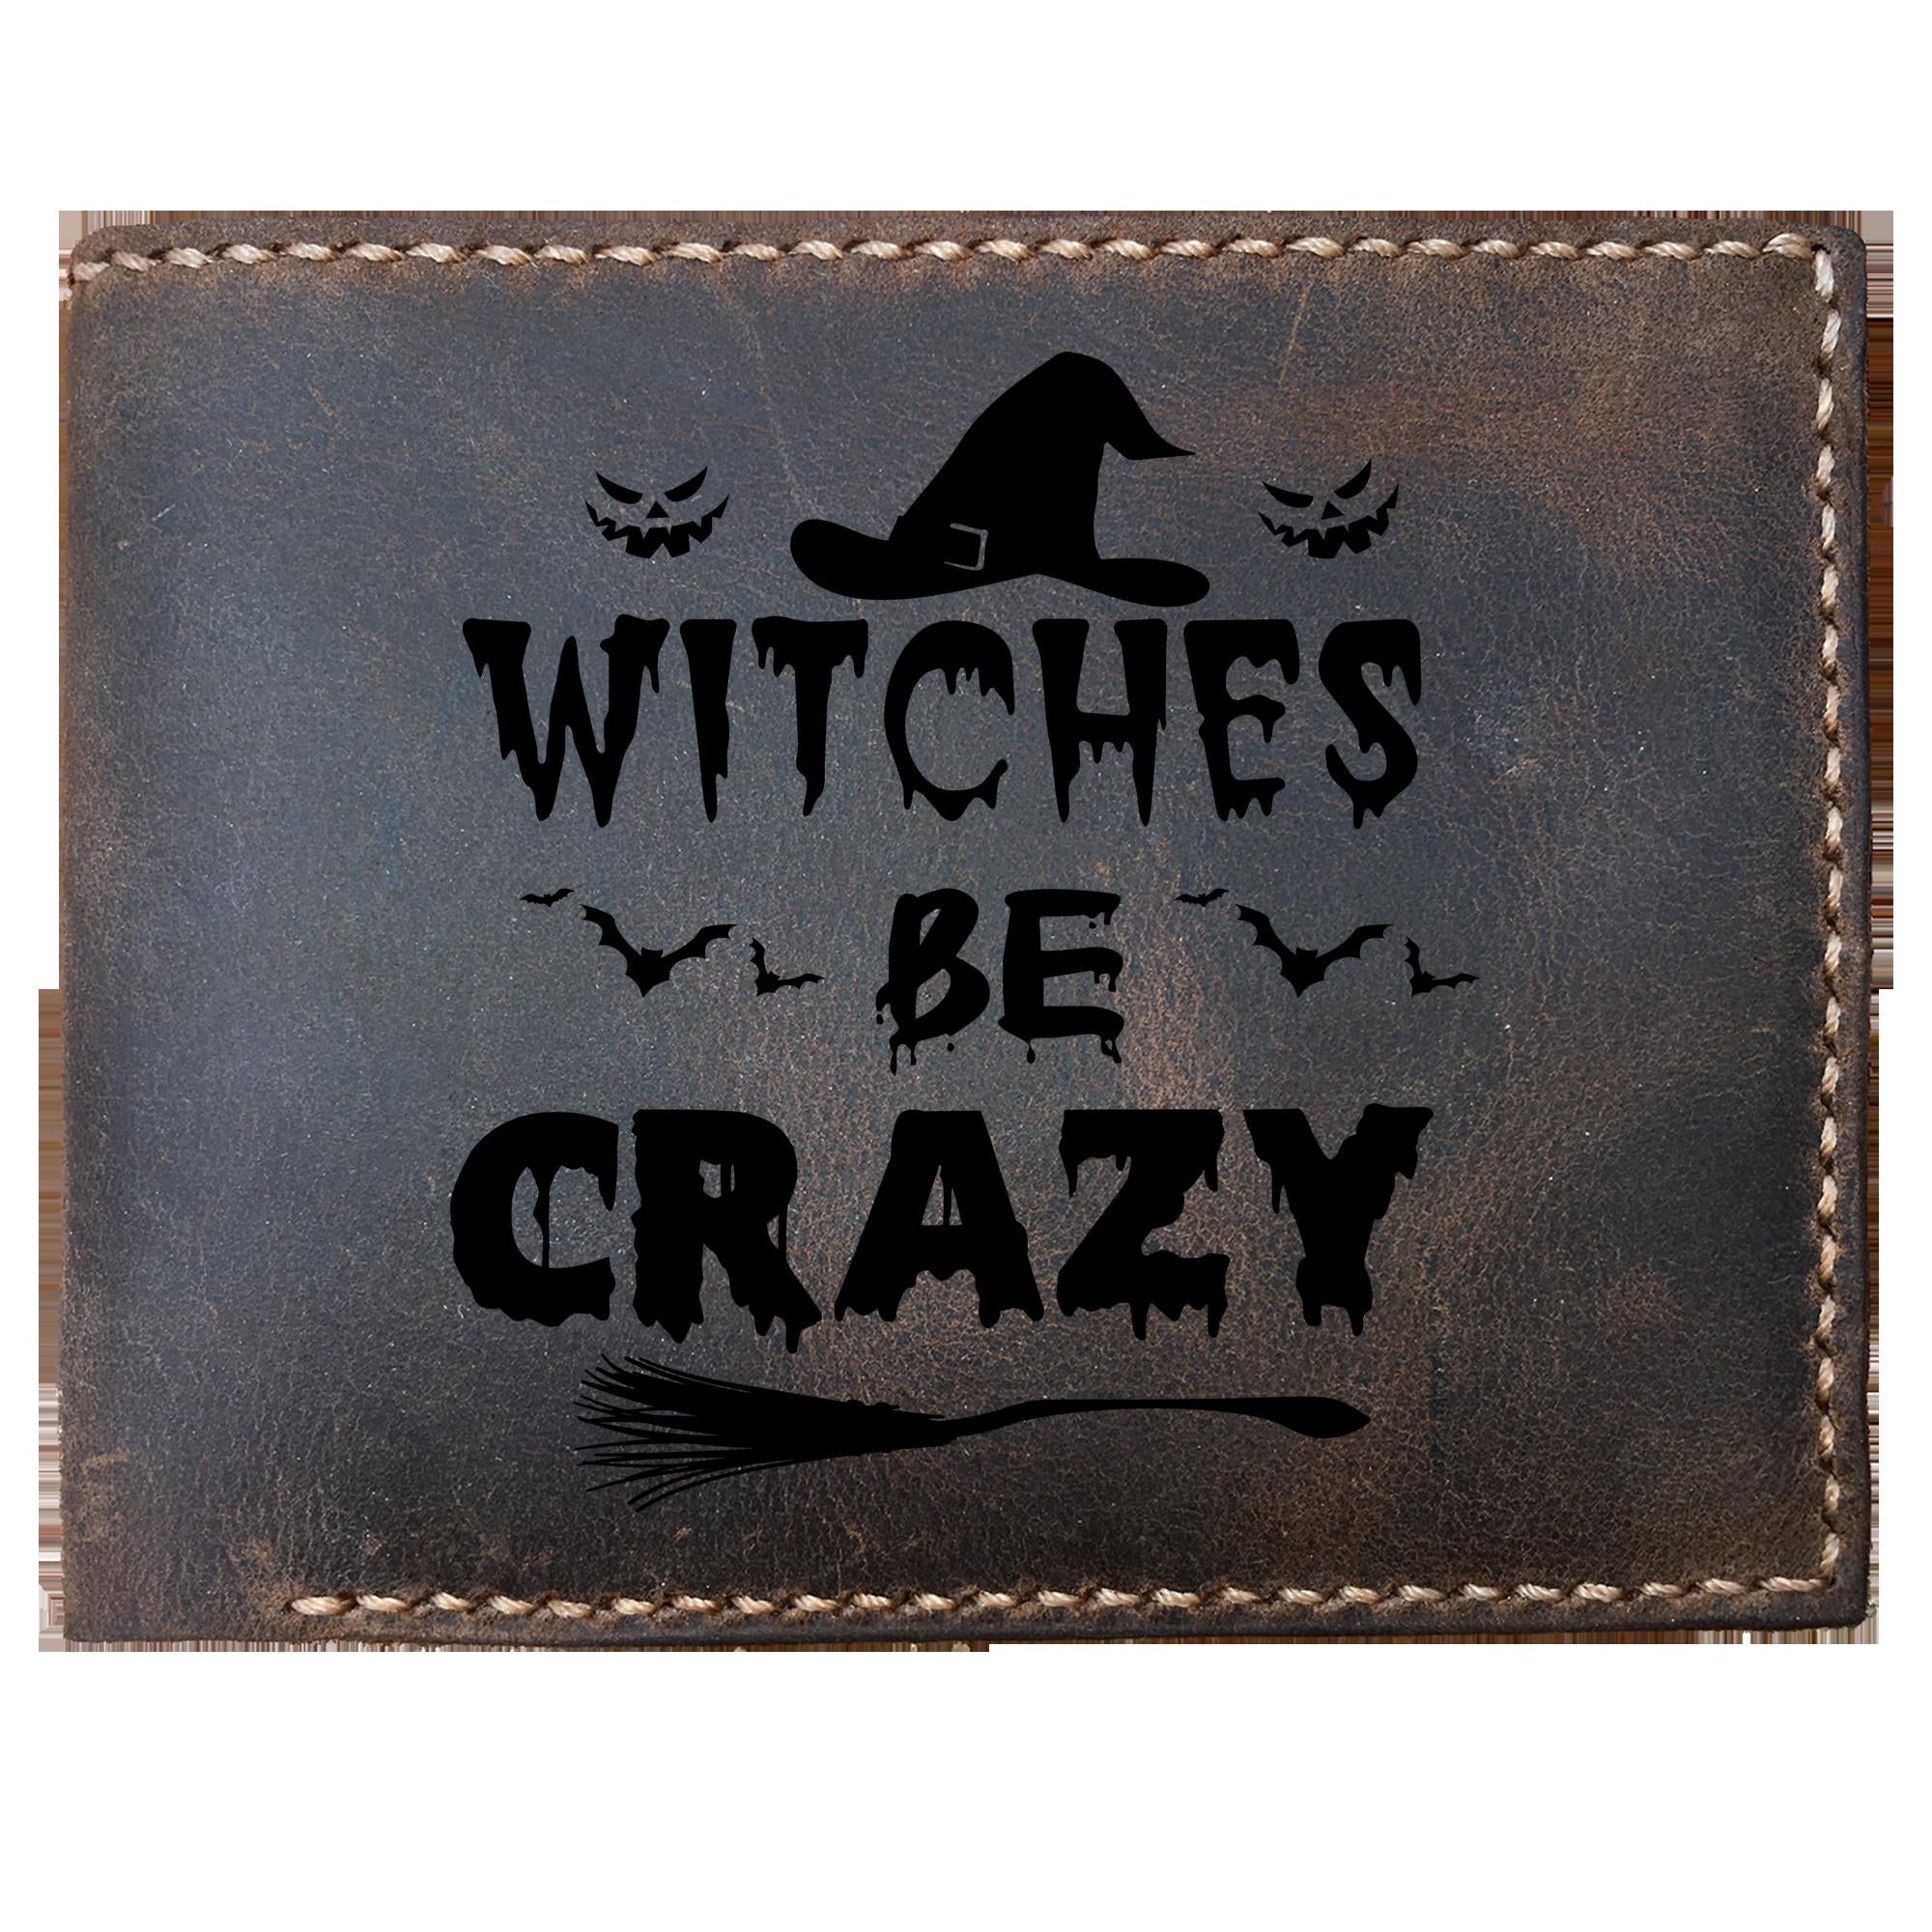 Skitongifts Funny Custom Laser Engraved Bifold Leather Wallet For Men, Witches Be Crazys, Halloween Costume , Halloween